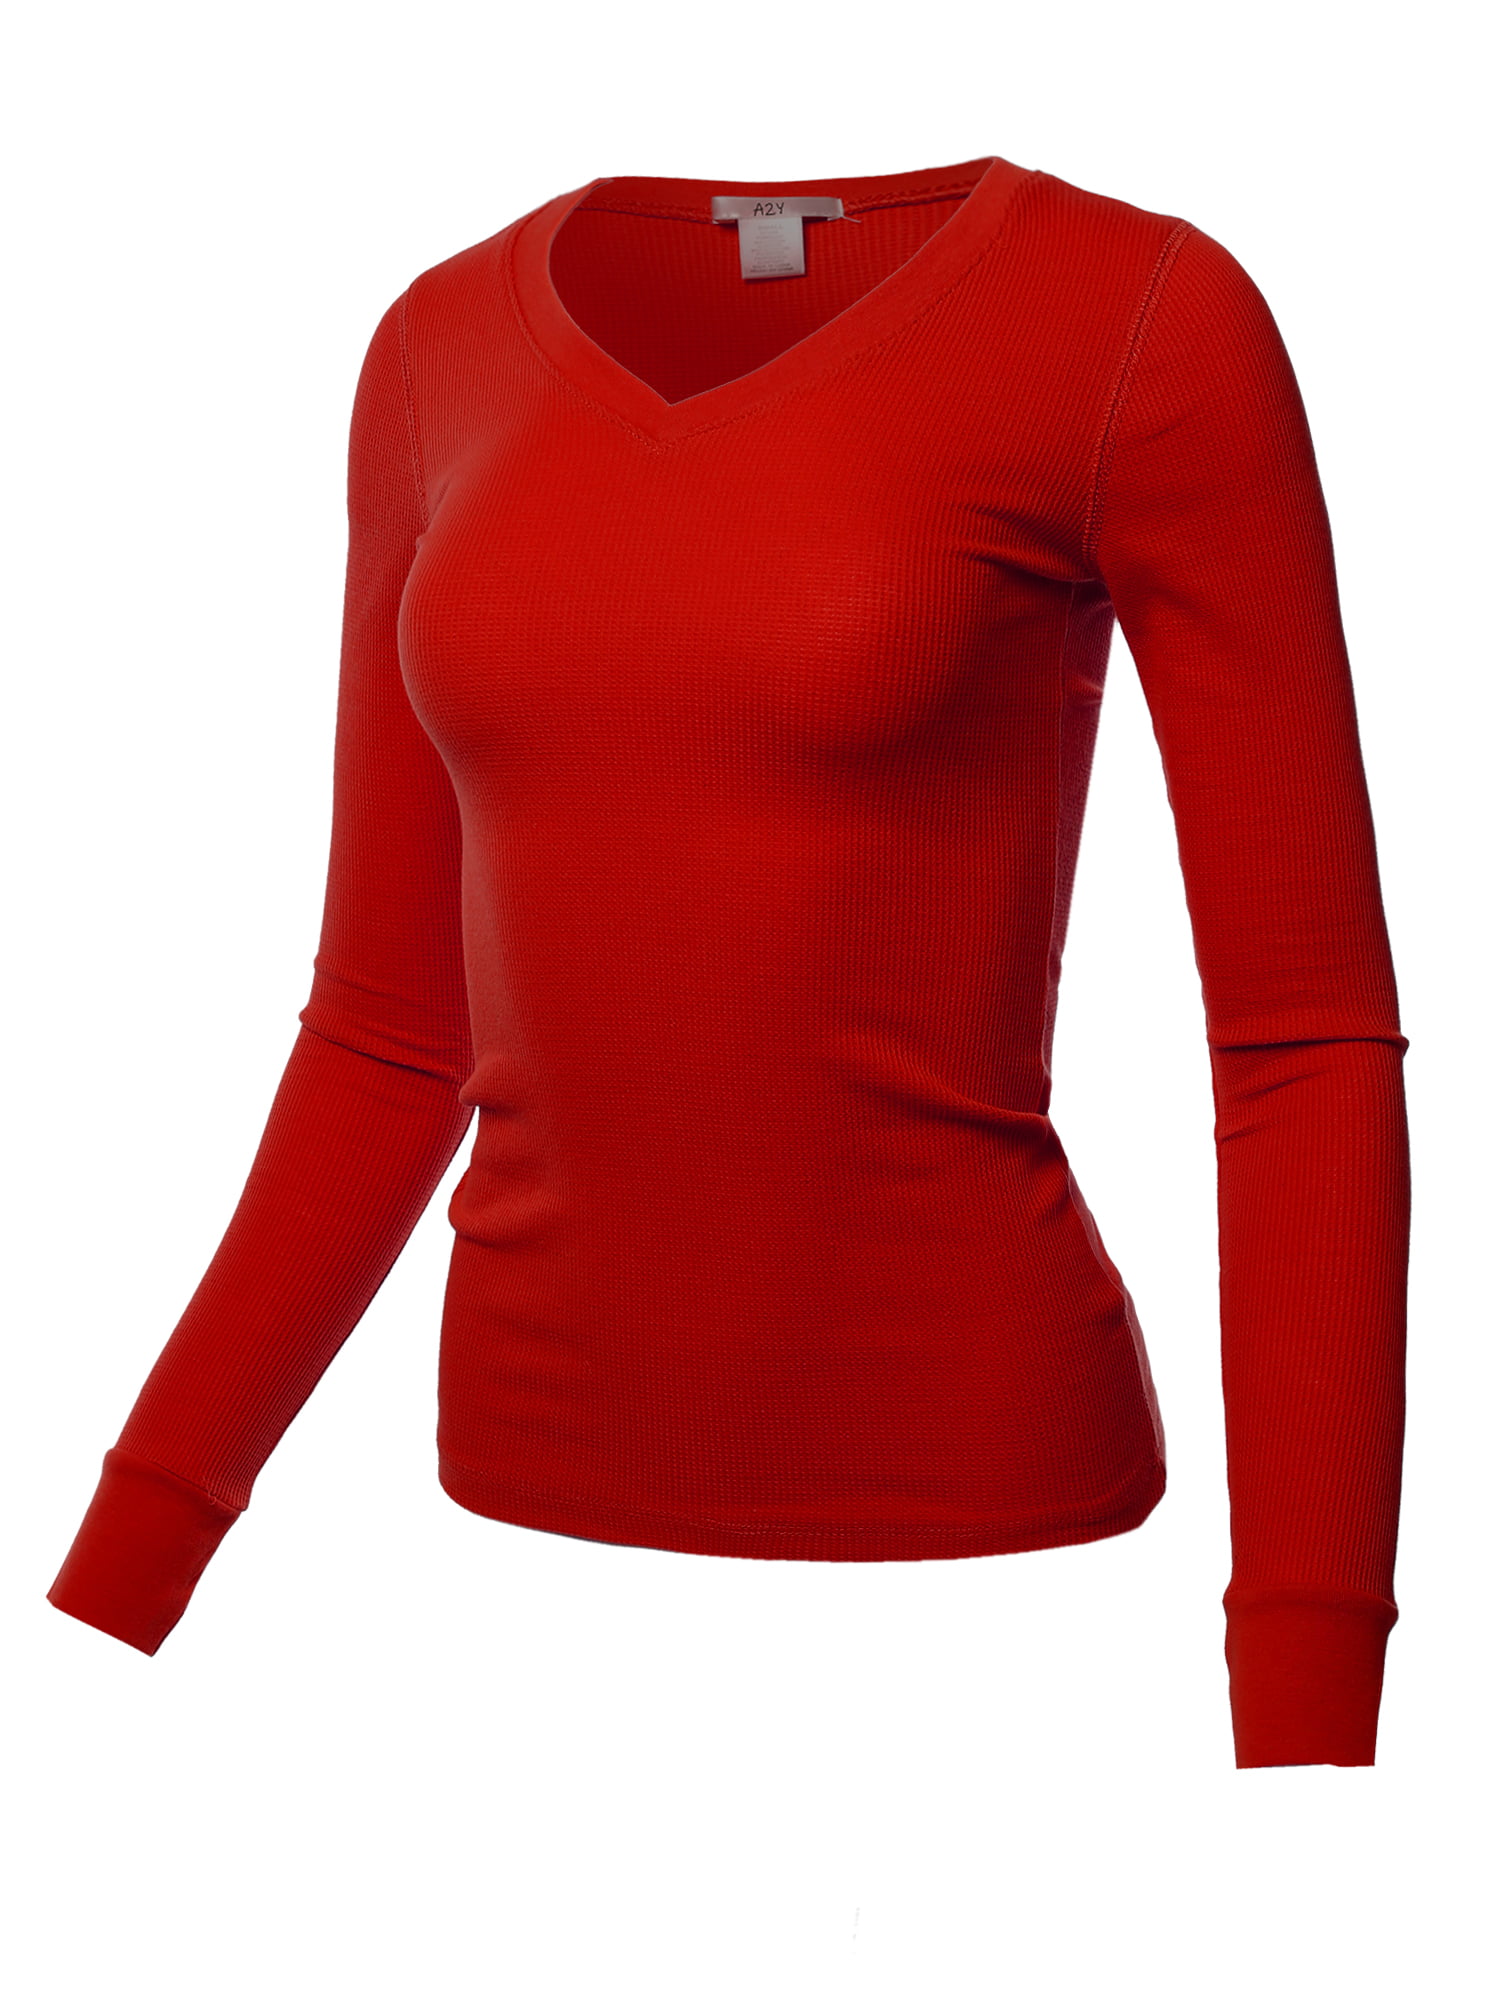 A2Y Women\'s Basic Solid Fitted Long Sleeve V-Neck Thermal Top Shirt Scarlet  Red 3XL